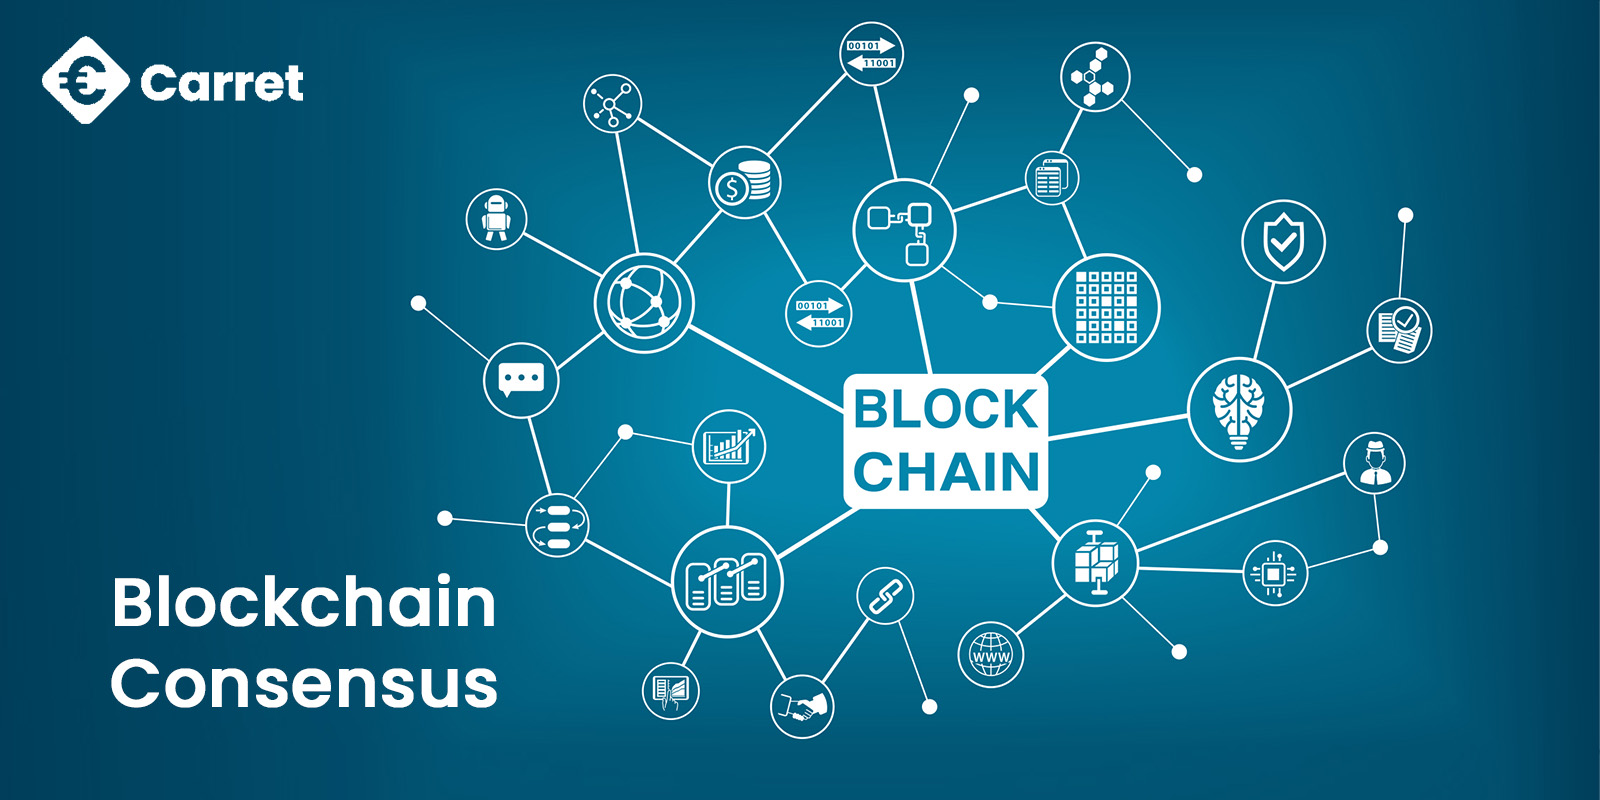 How Is Blockchain Consensus Attained and Why Is It Important?